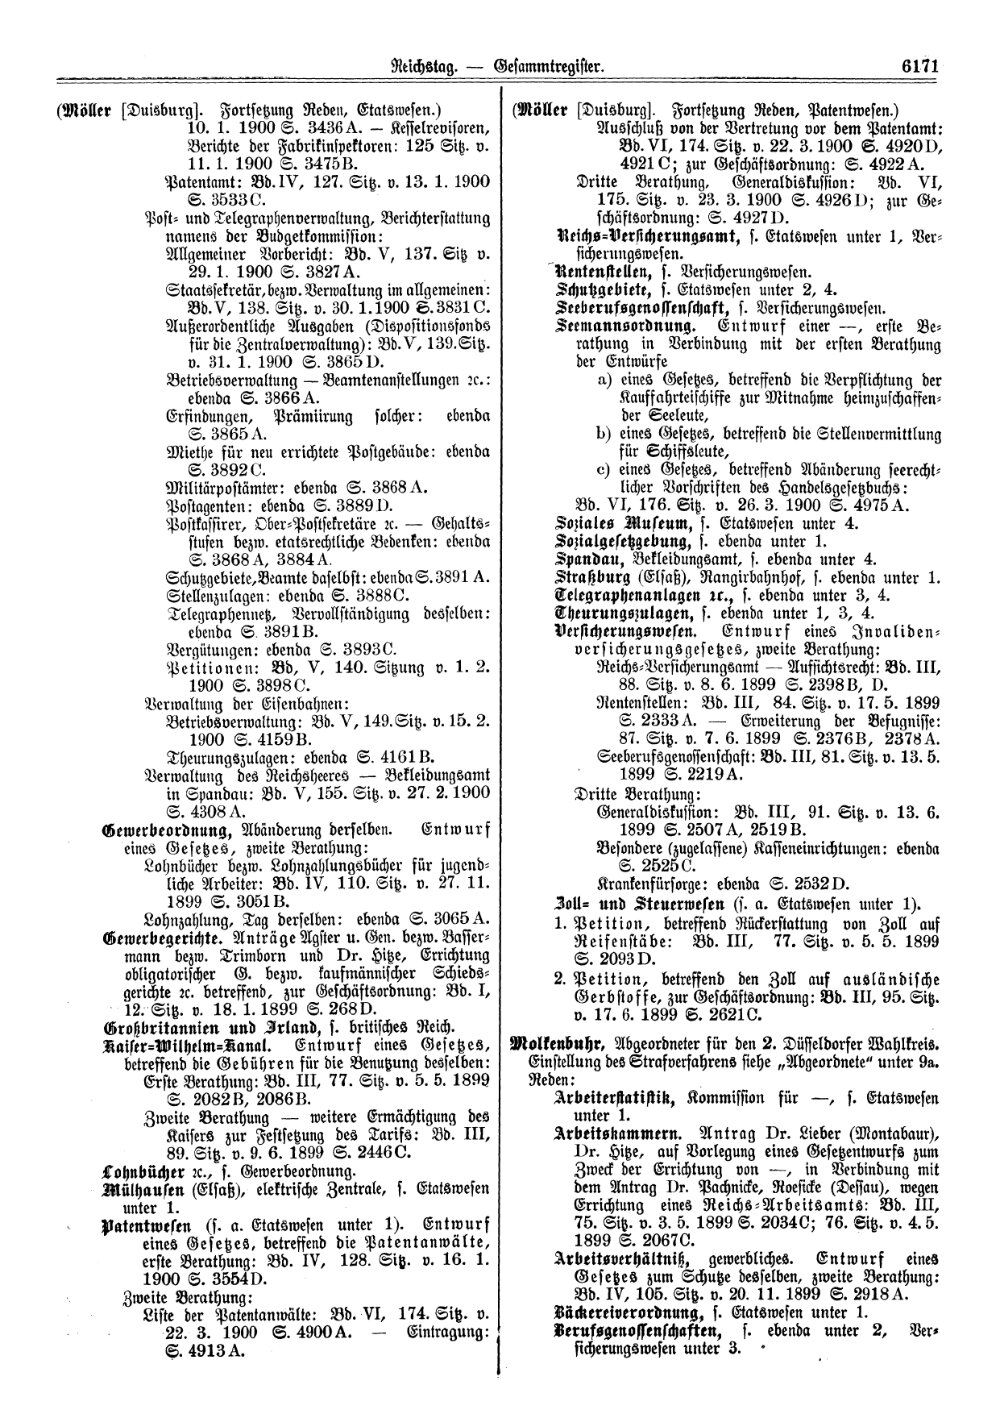 Scan of page 6171